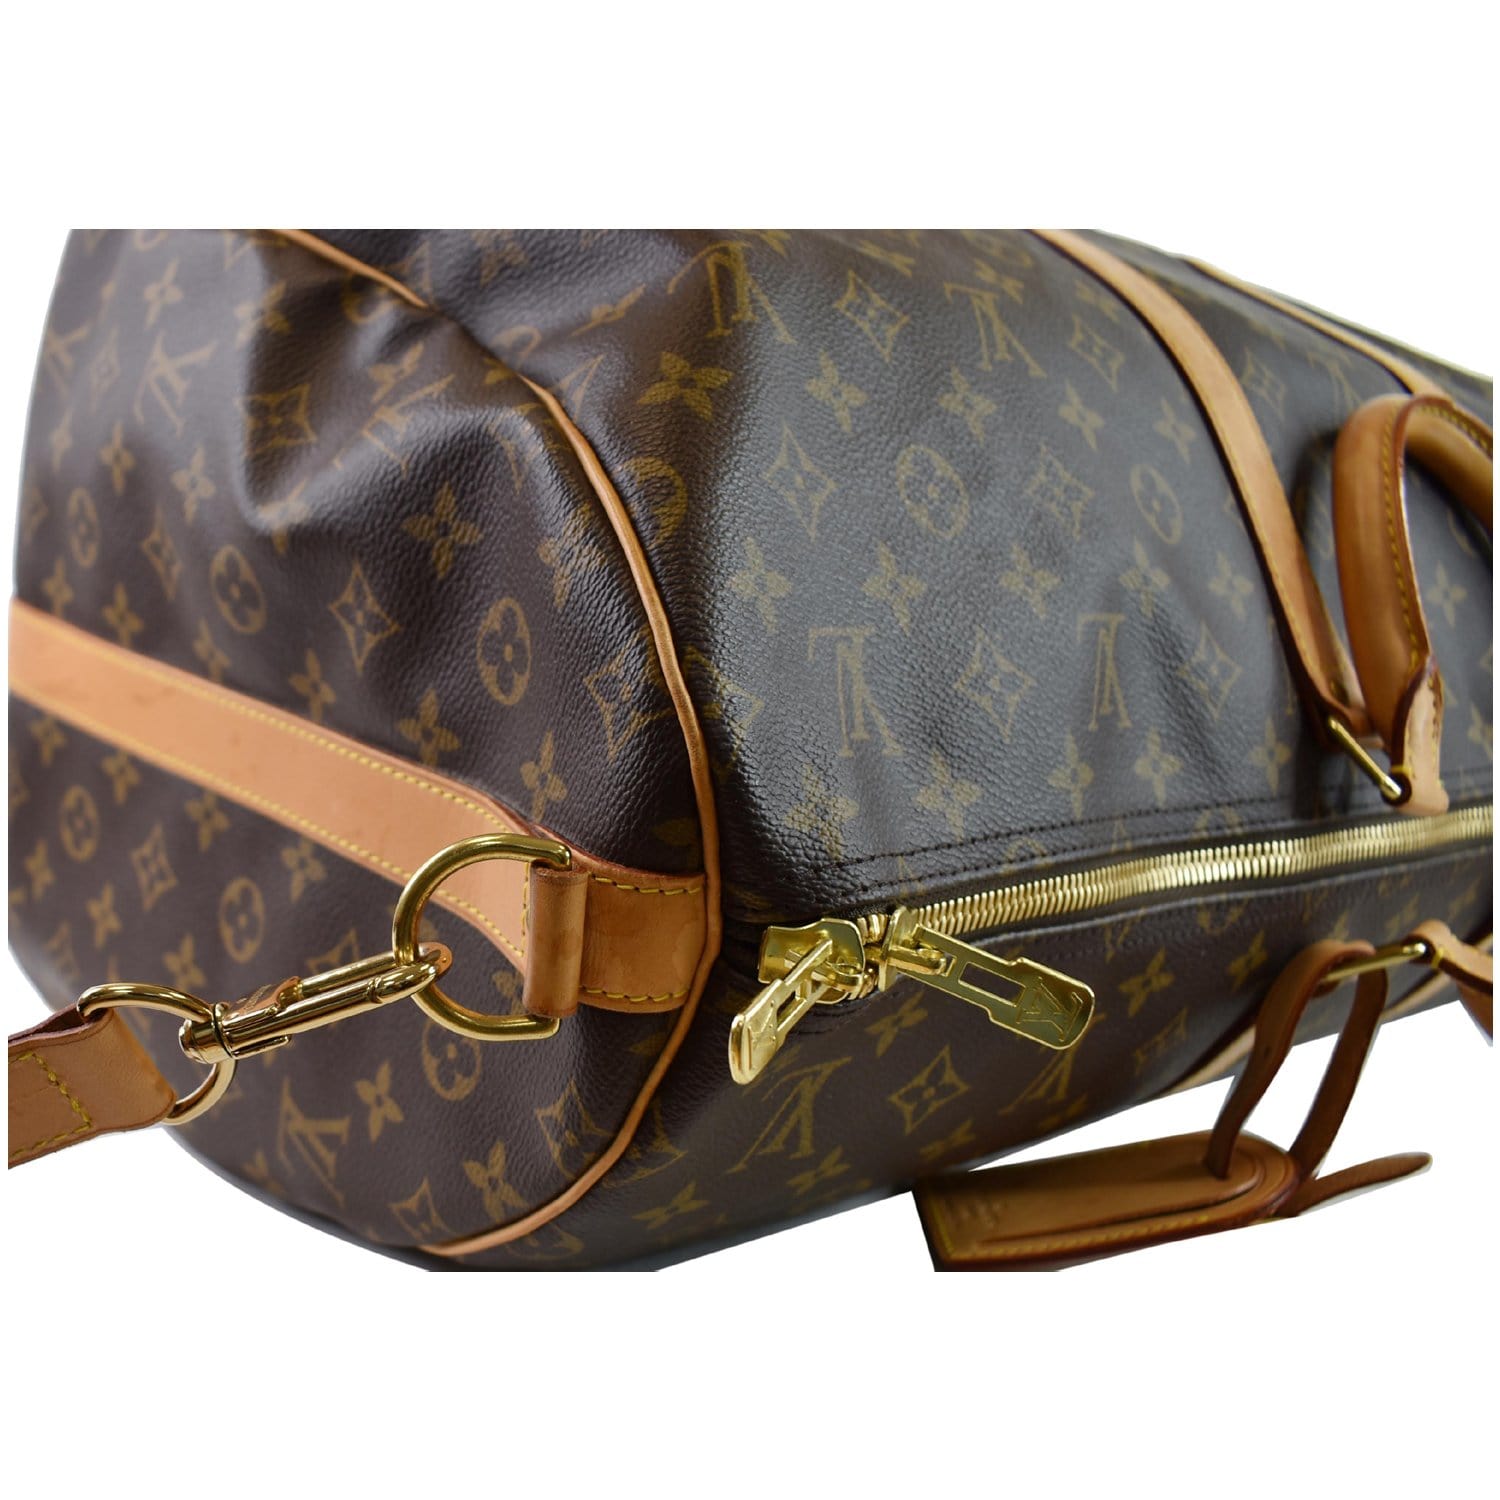 LOUIS VUITTON Brown Monogram Canvas Keepall Luggage Bag 55 For